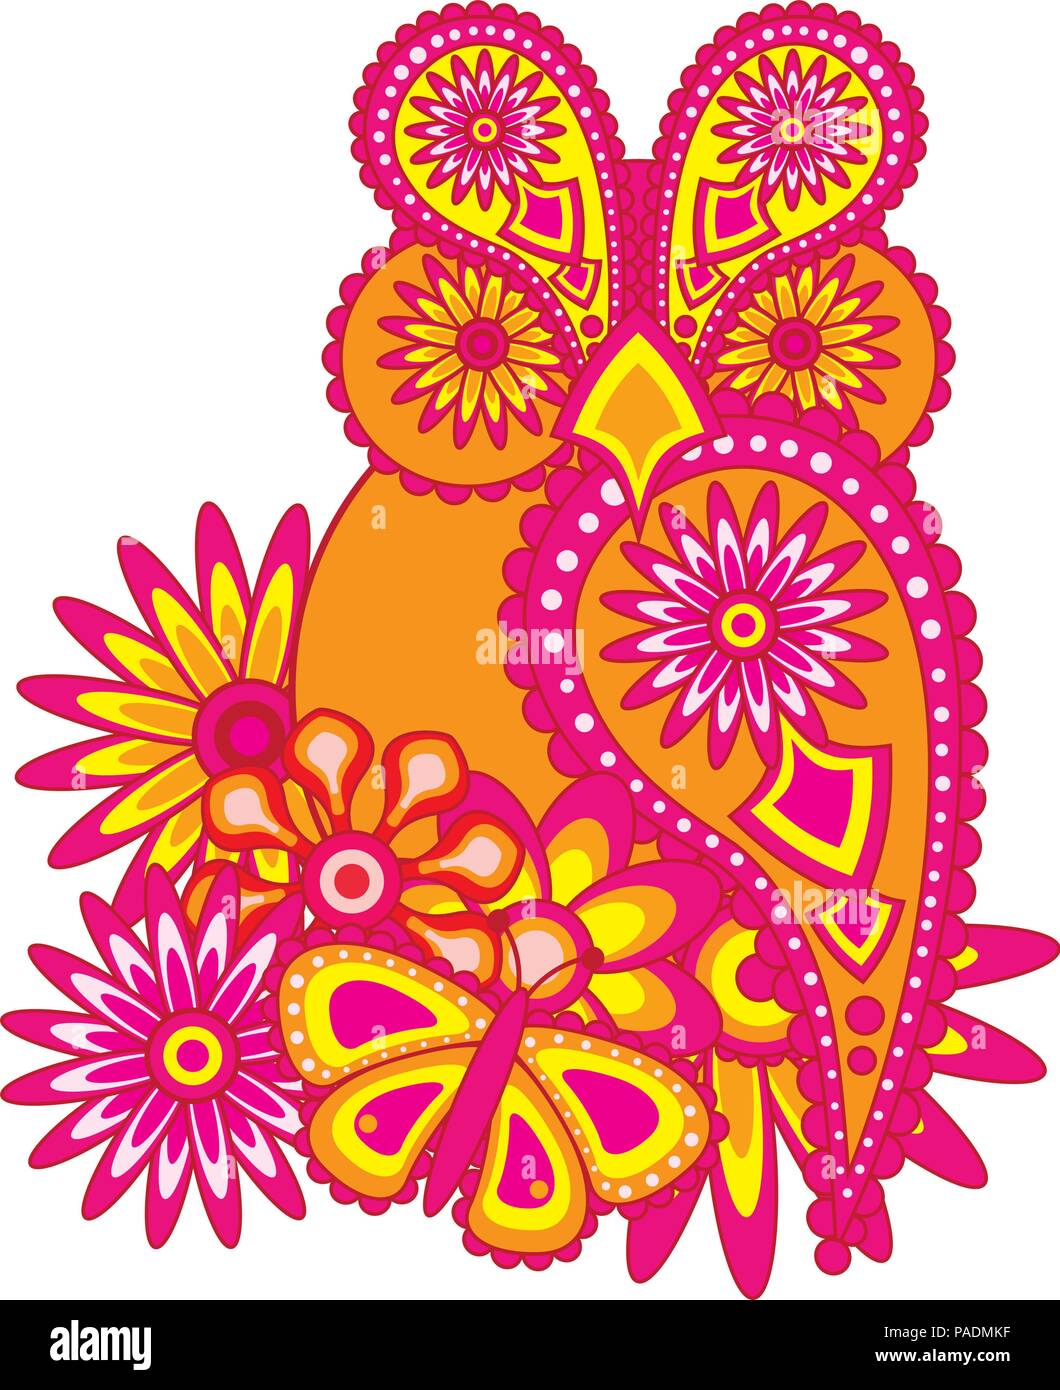 Paisley floral pattern abstract owl flowers and butterfly color illustration Stock Vector